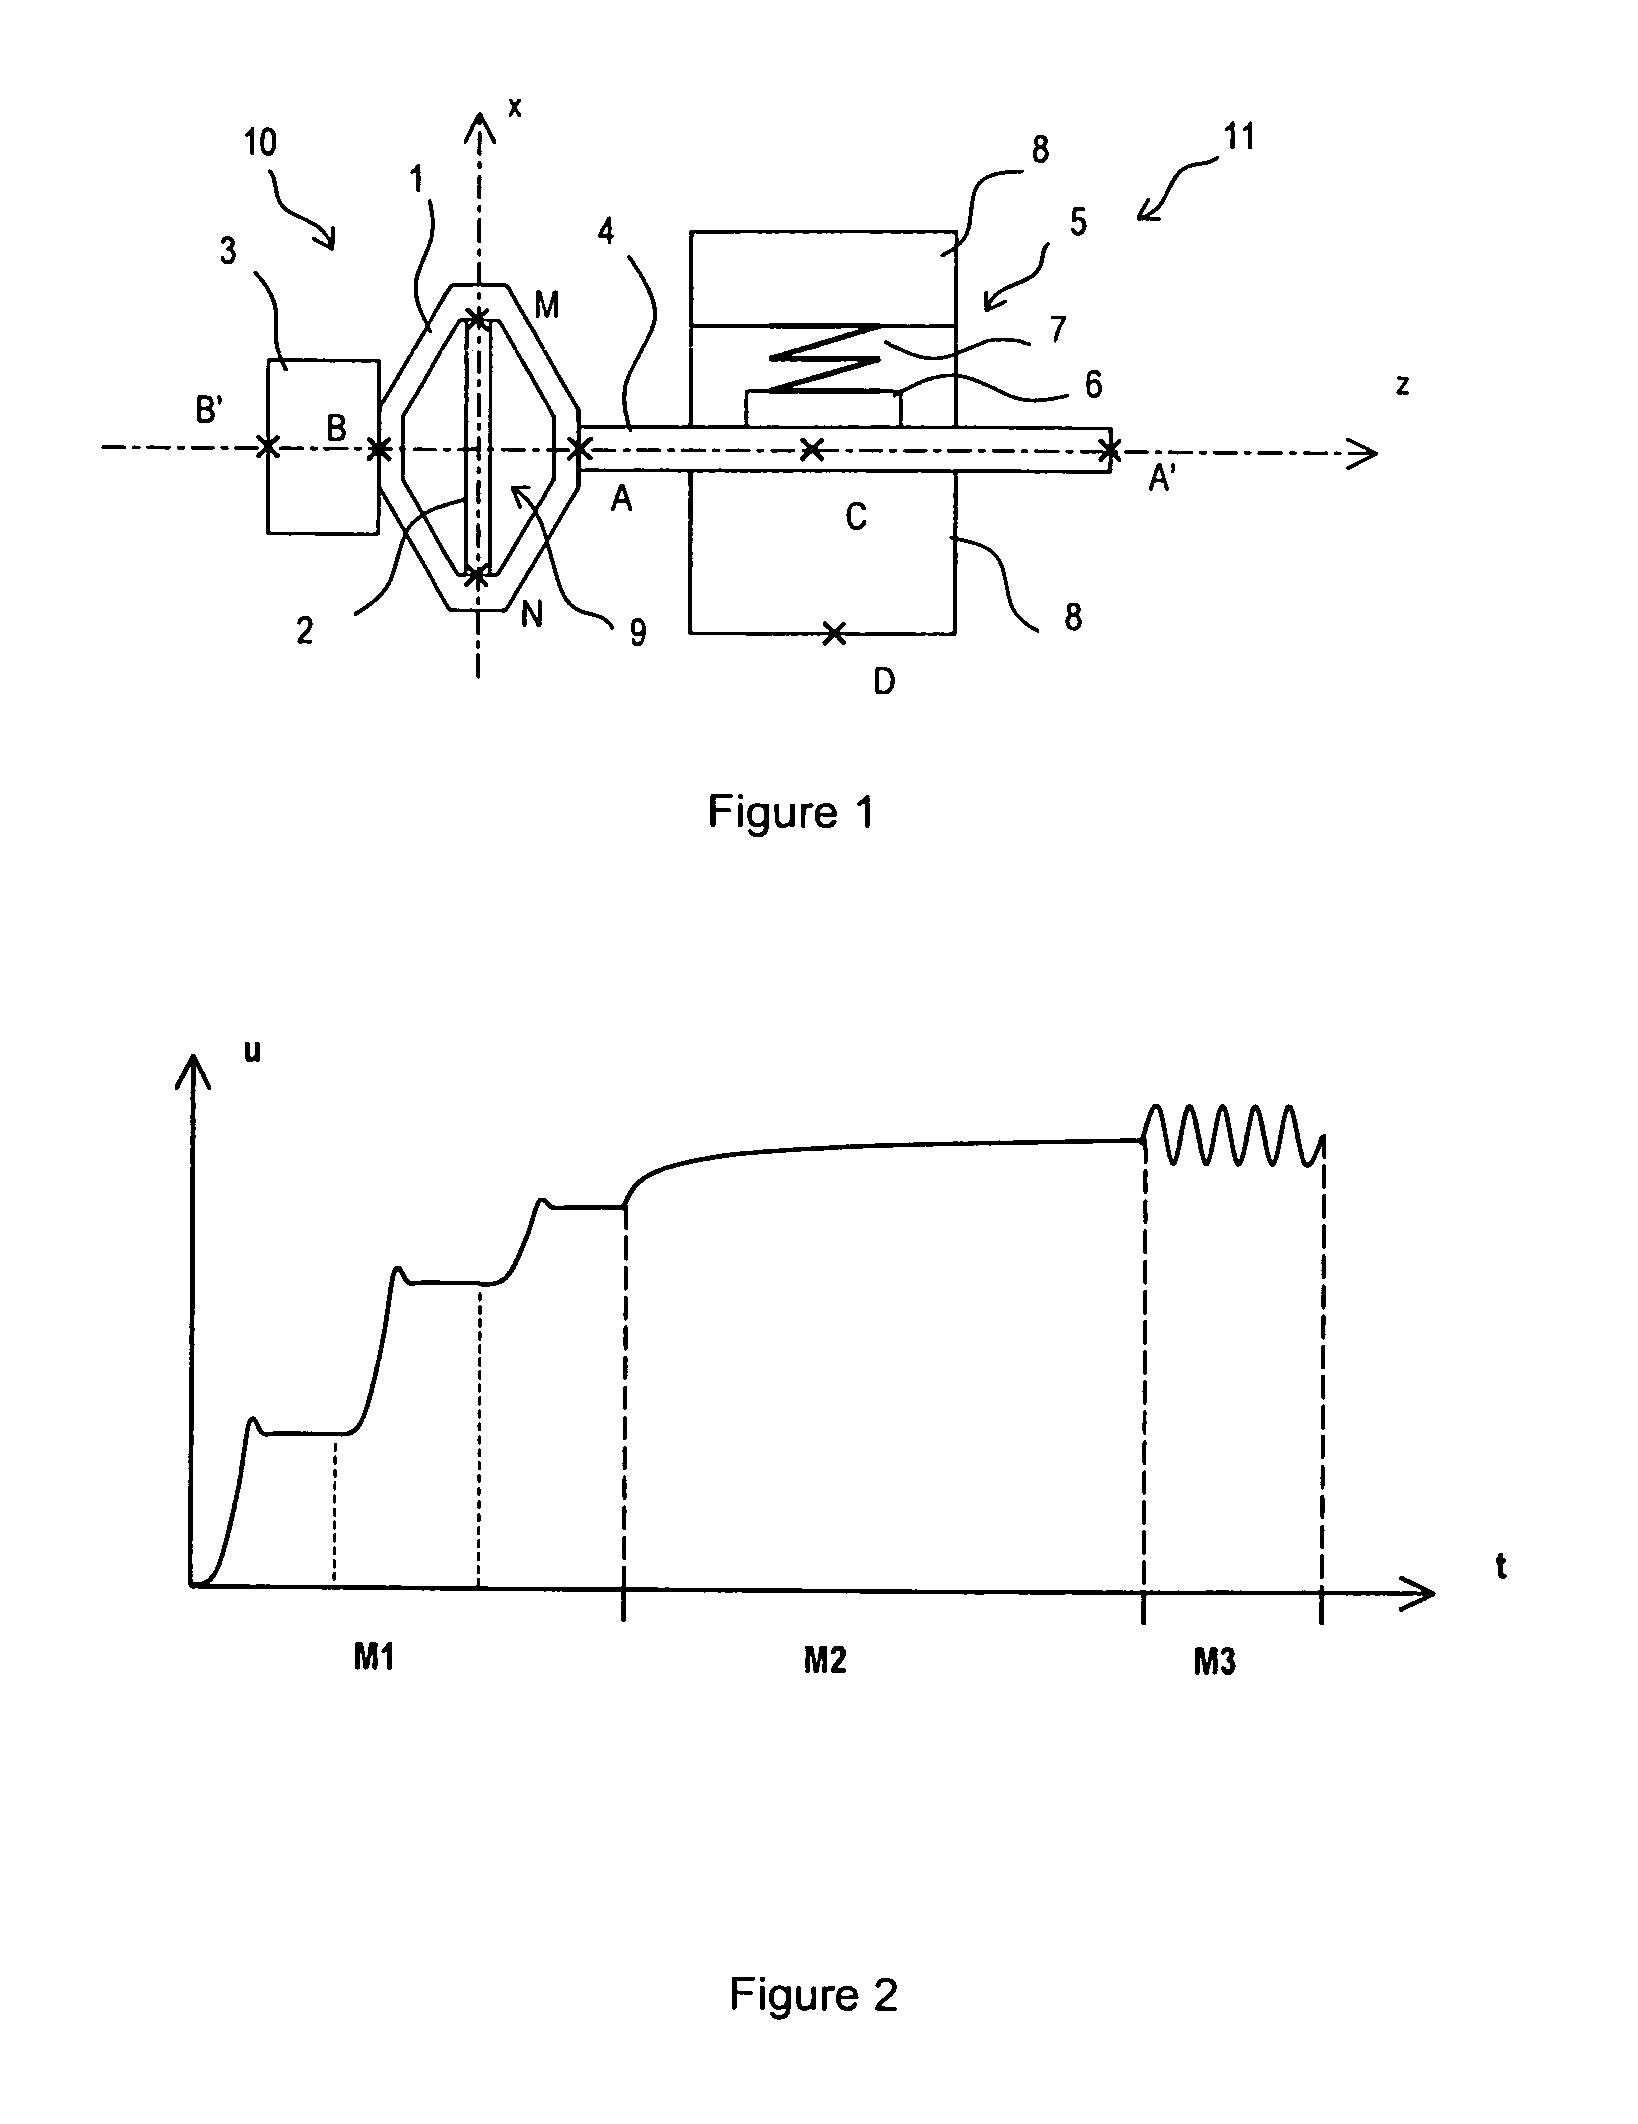 Fine positioning system using an inertial motor based on a mechanical amplifier